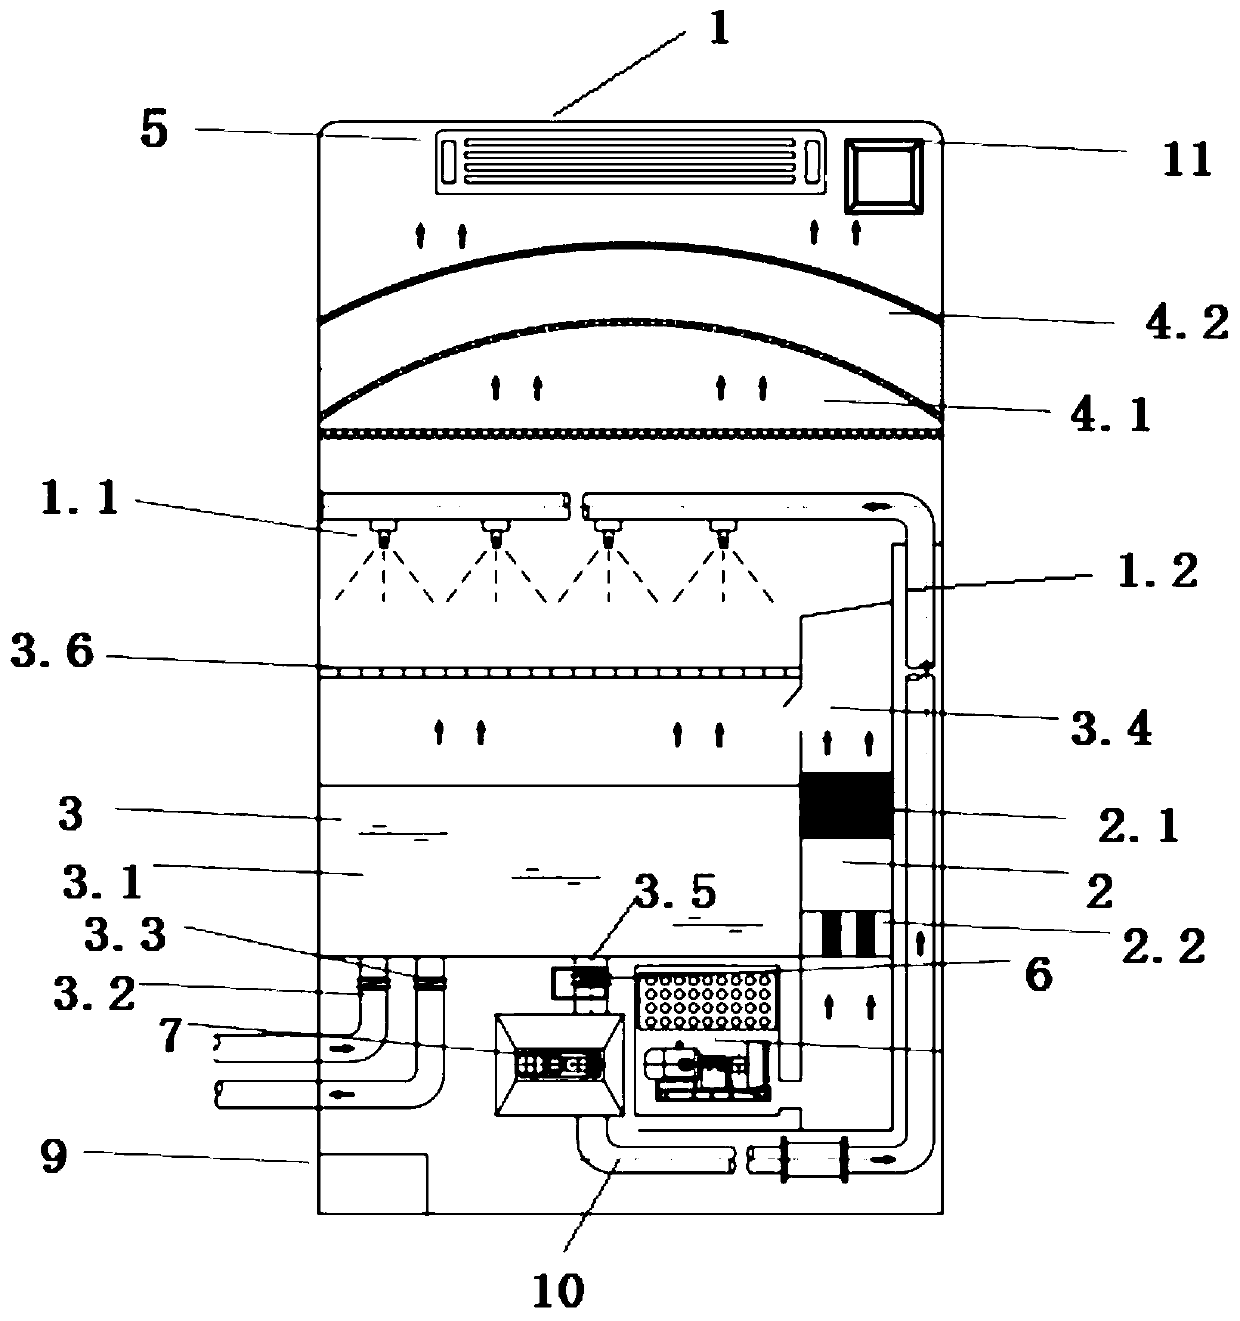 Liquid purification and thermocatalysis technology coupled indoor air purification device